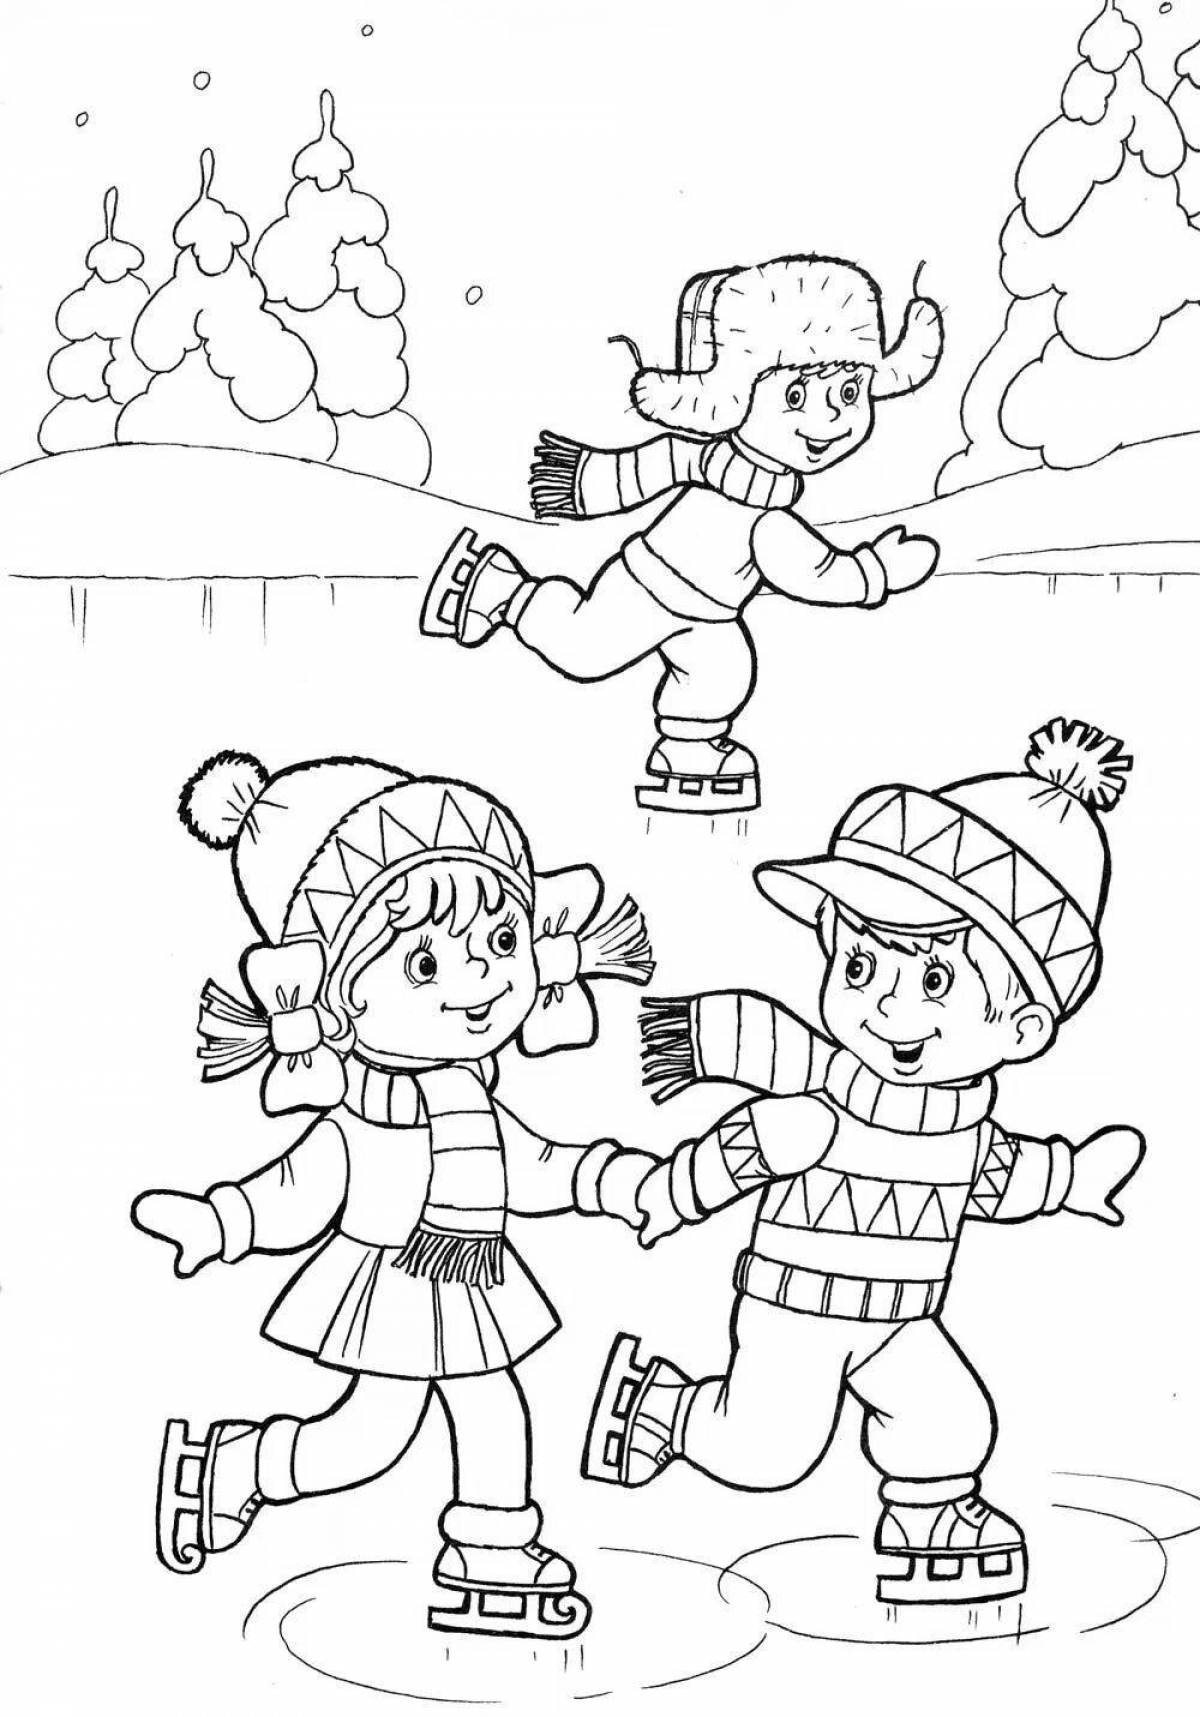 Charming winter drawing